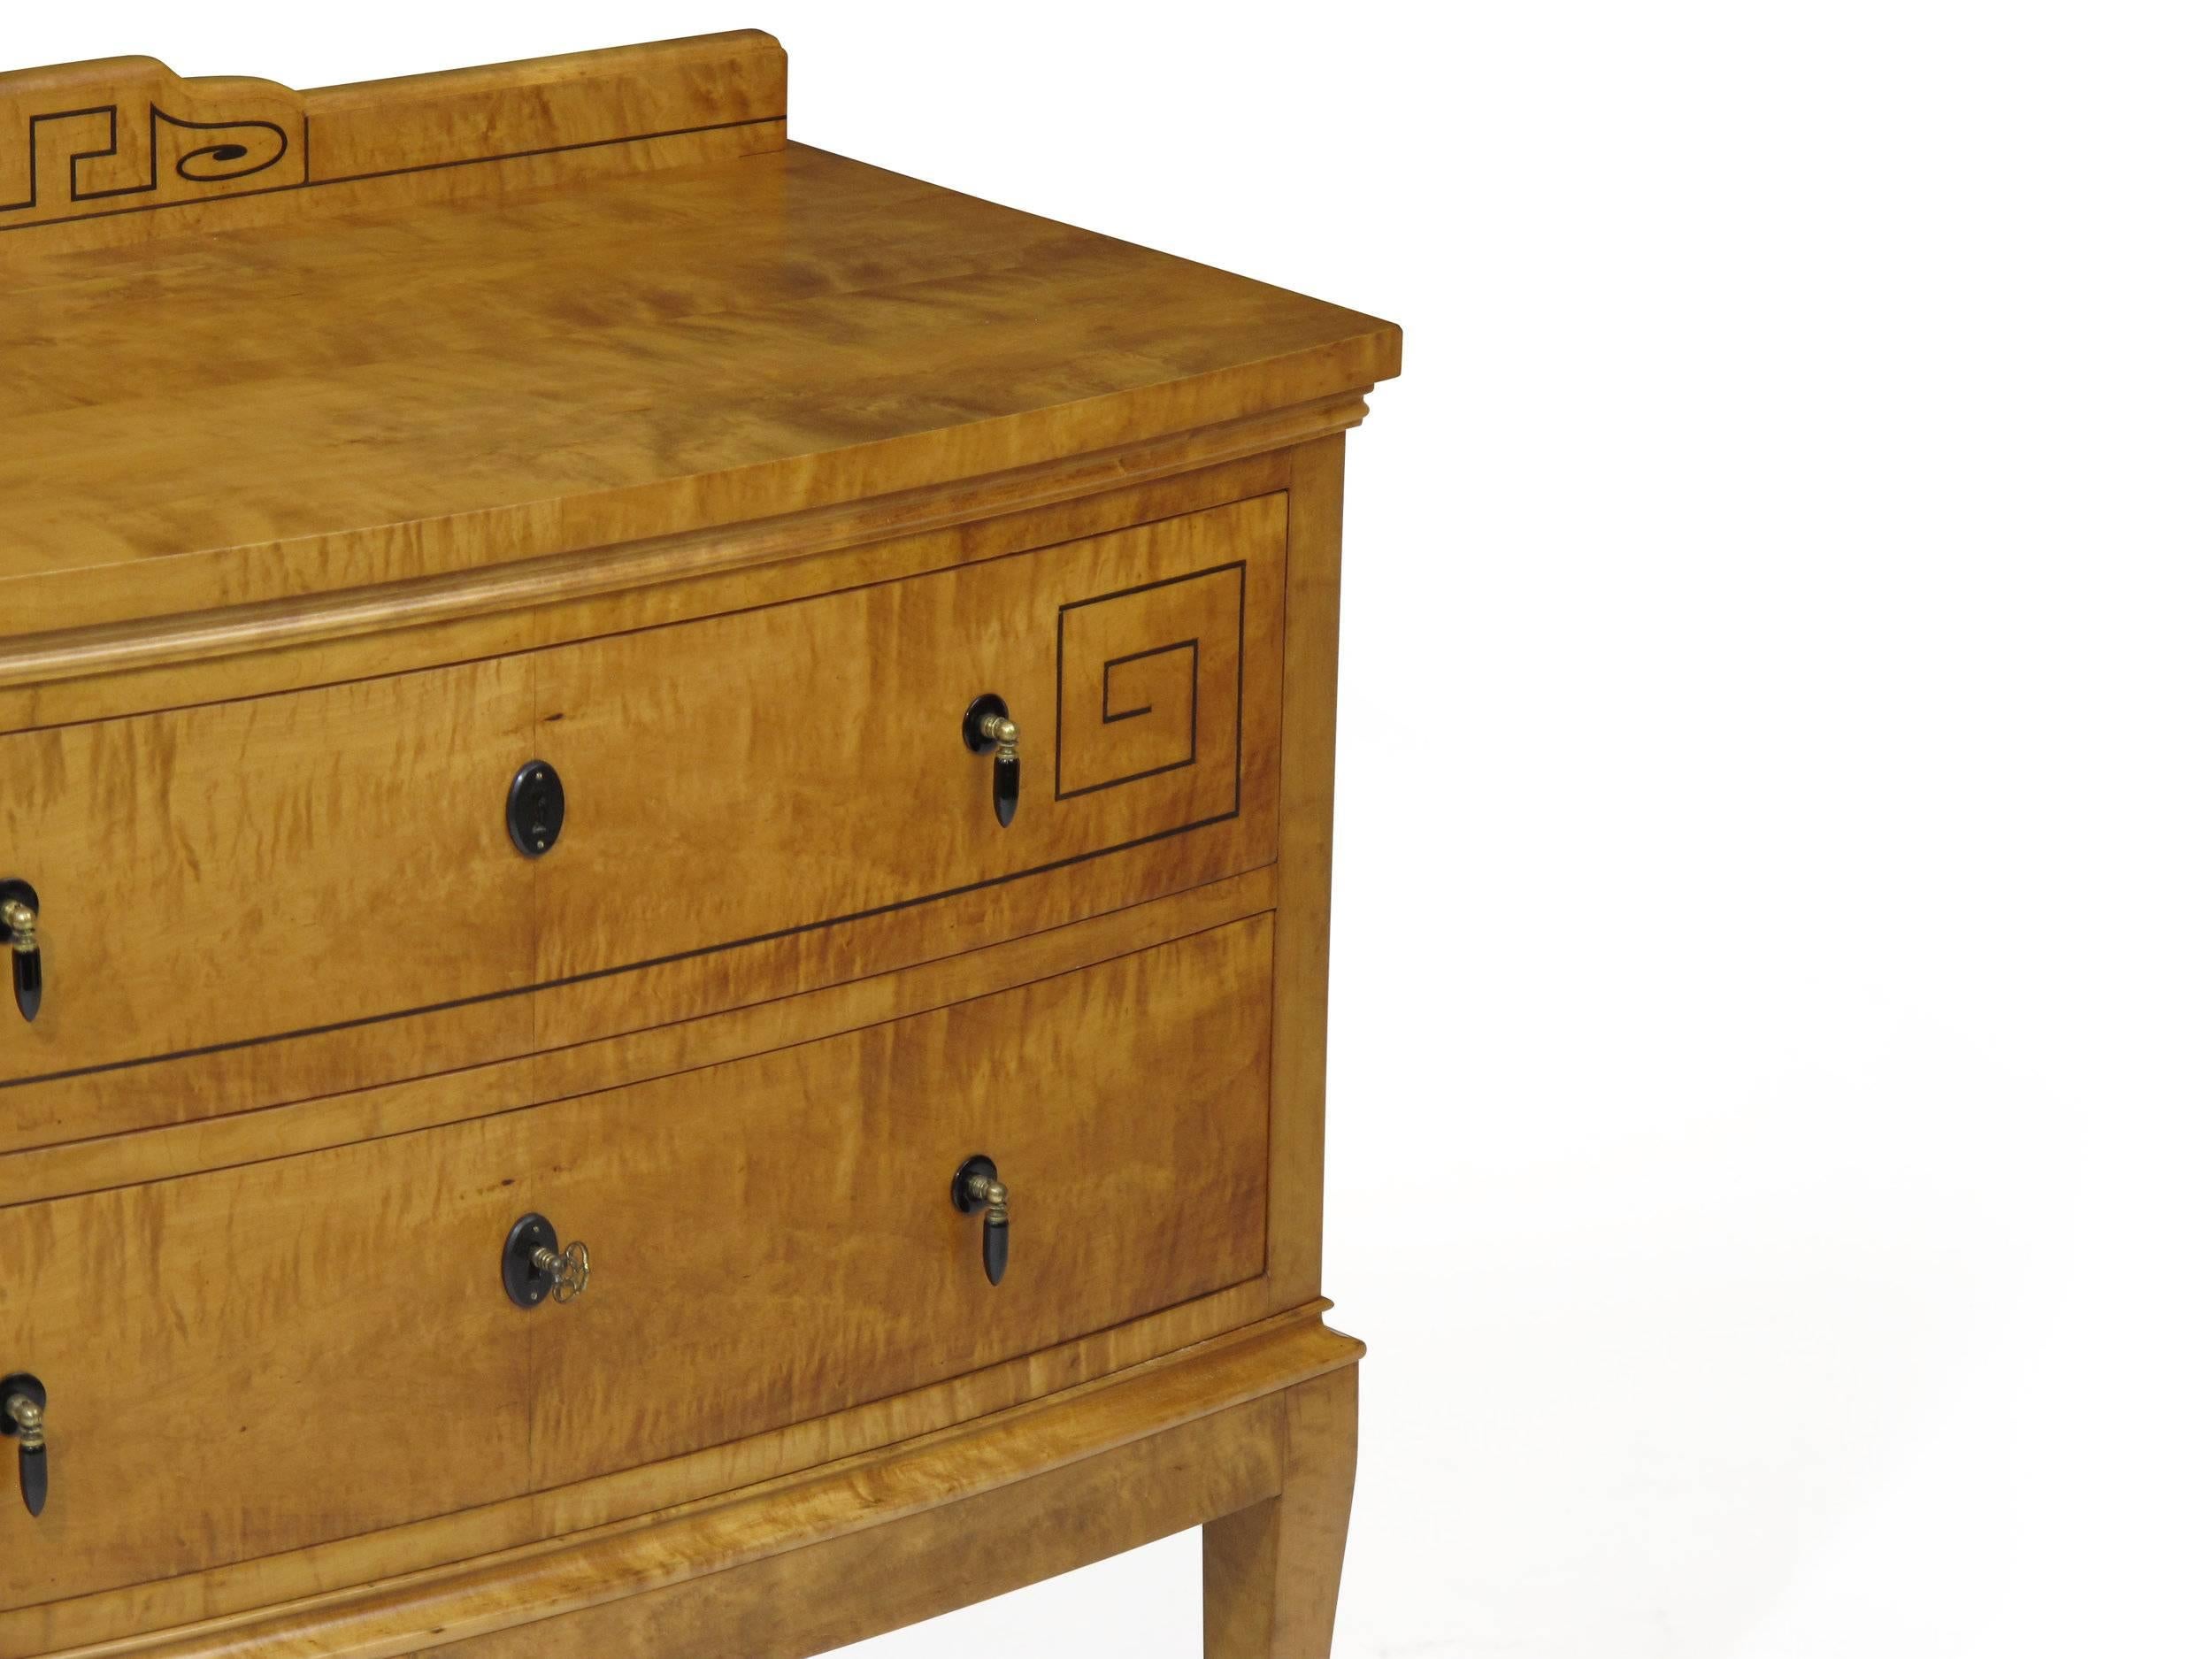 Exquisitely grained flamed birch chest of two drawers with inlay flourishes of ebony and tear-drop pulls.  Splayed saber legs giving it sturdy support. Drawers with dovetail joinery are curved outwards adding a gentle dynamic to the console while a